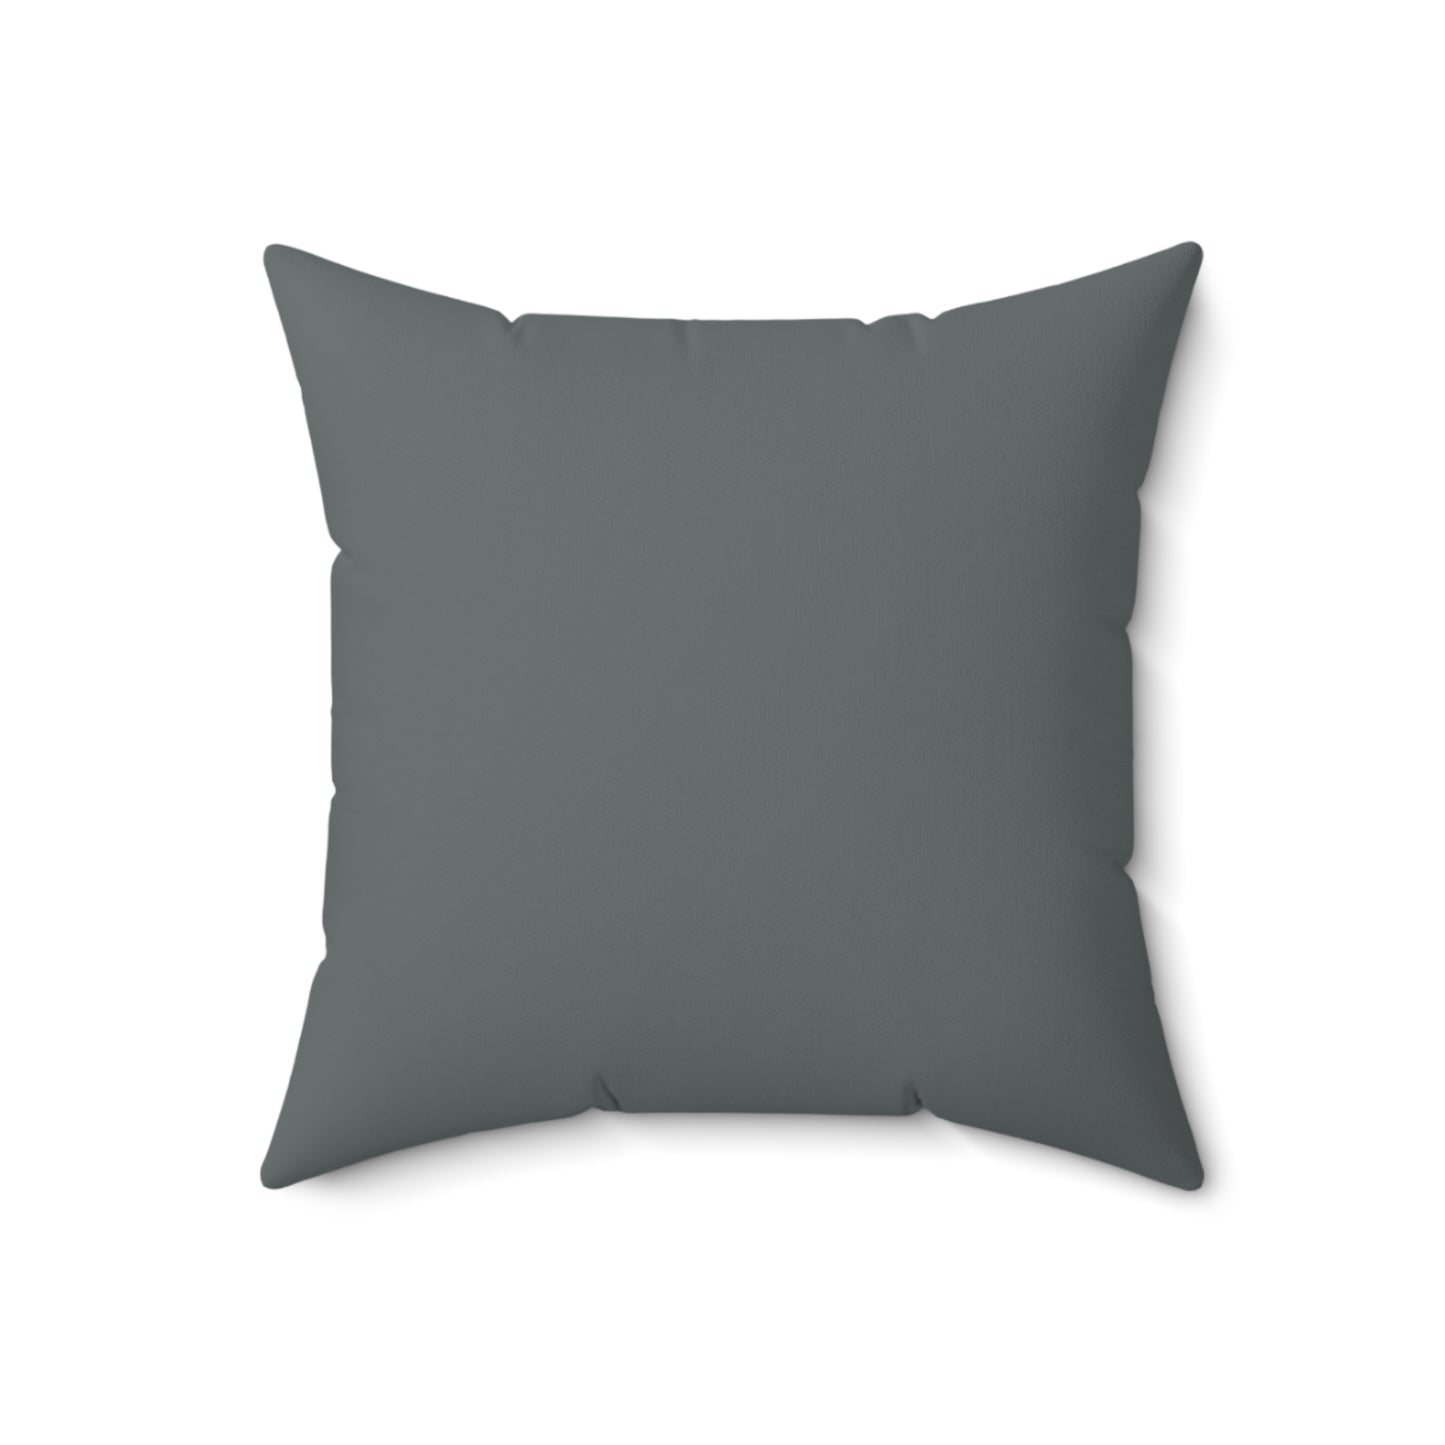 "Thinkin' About Dragons" Square Pillow